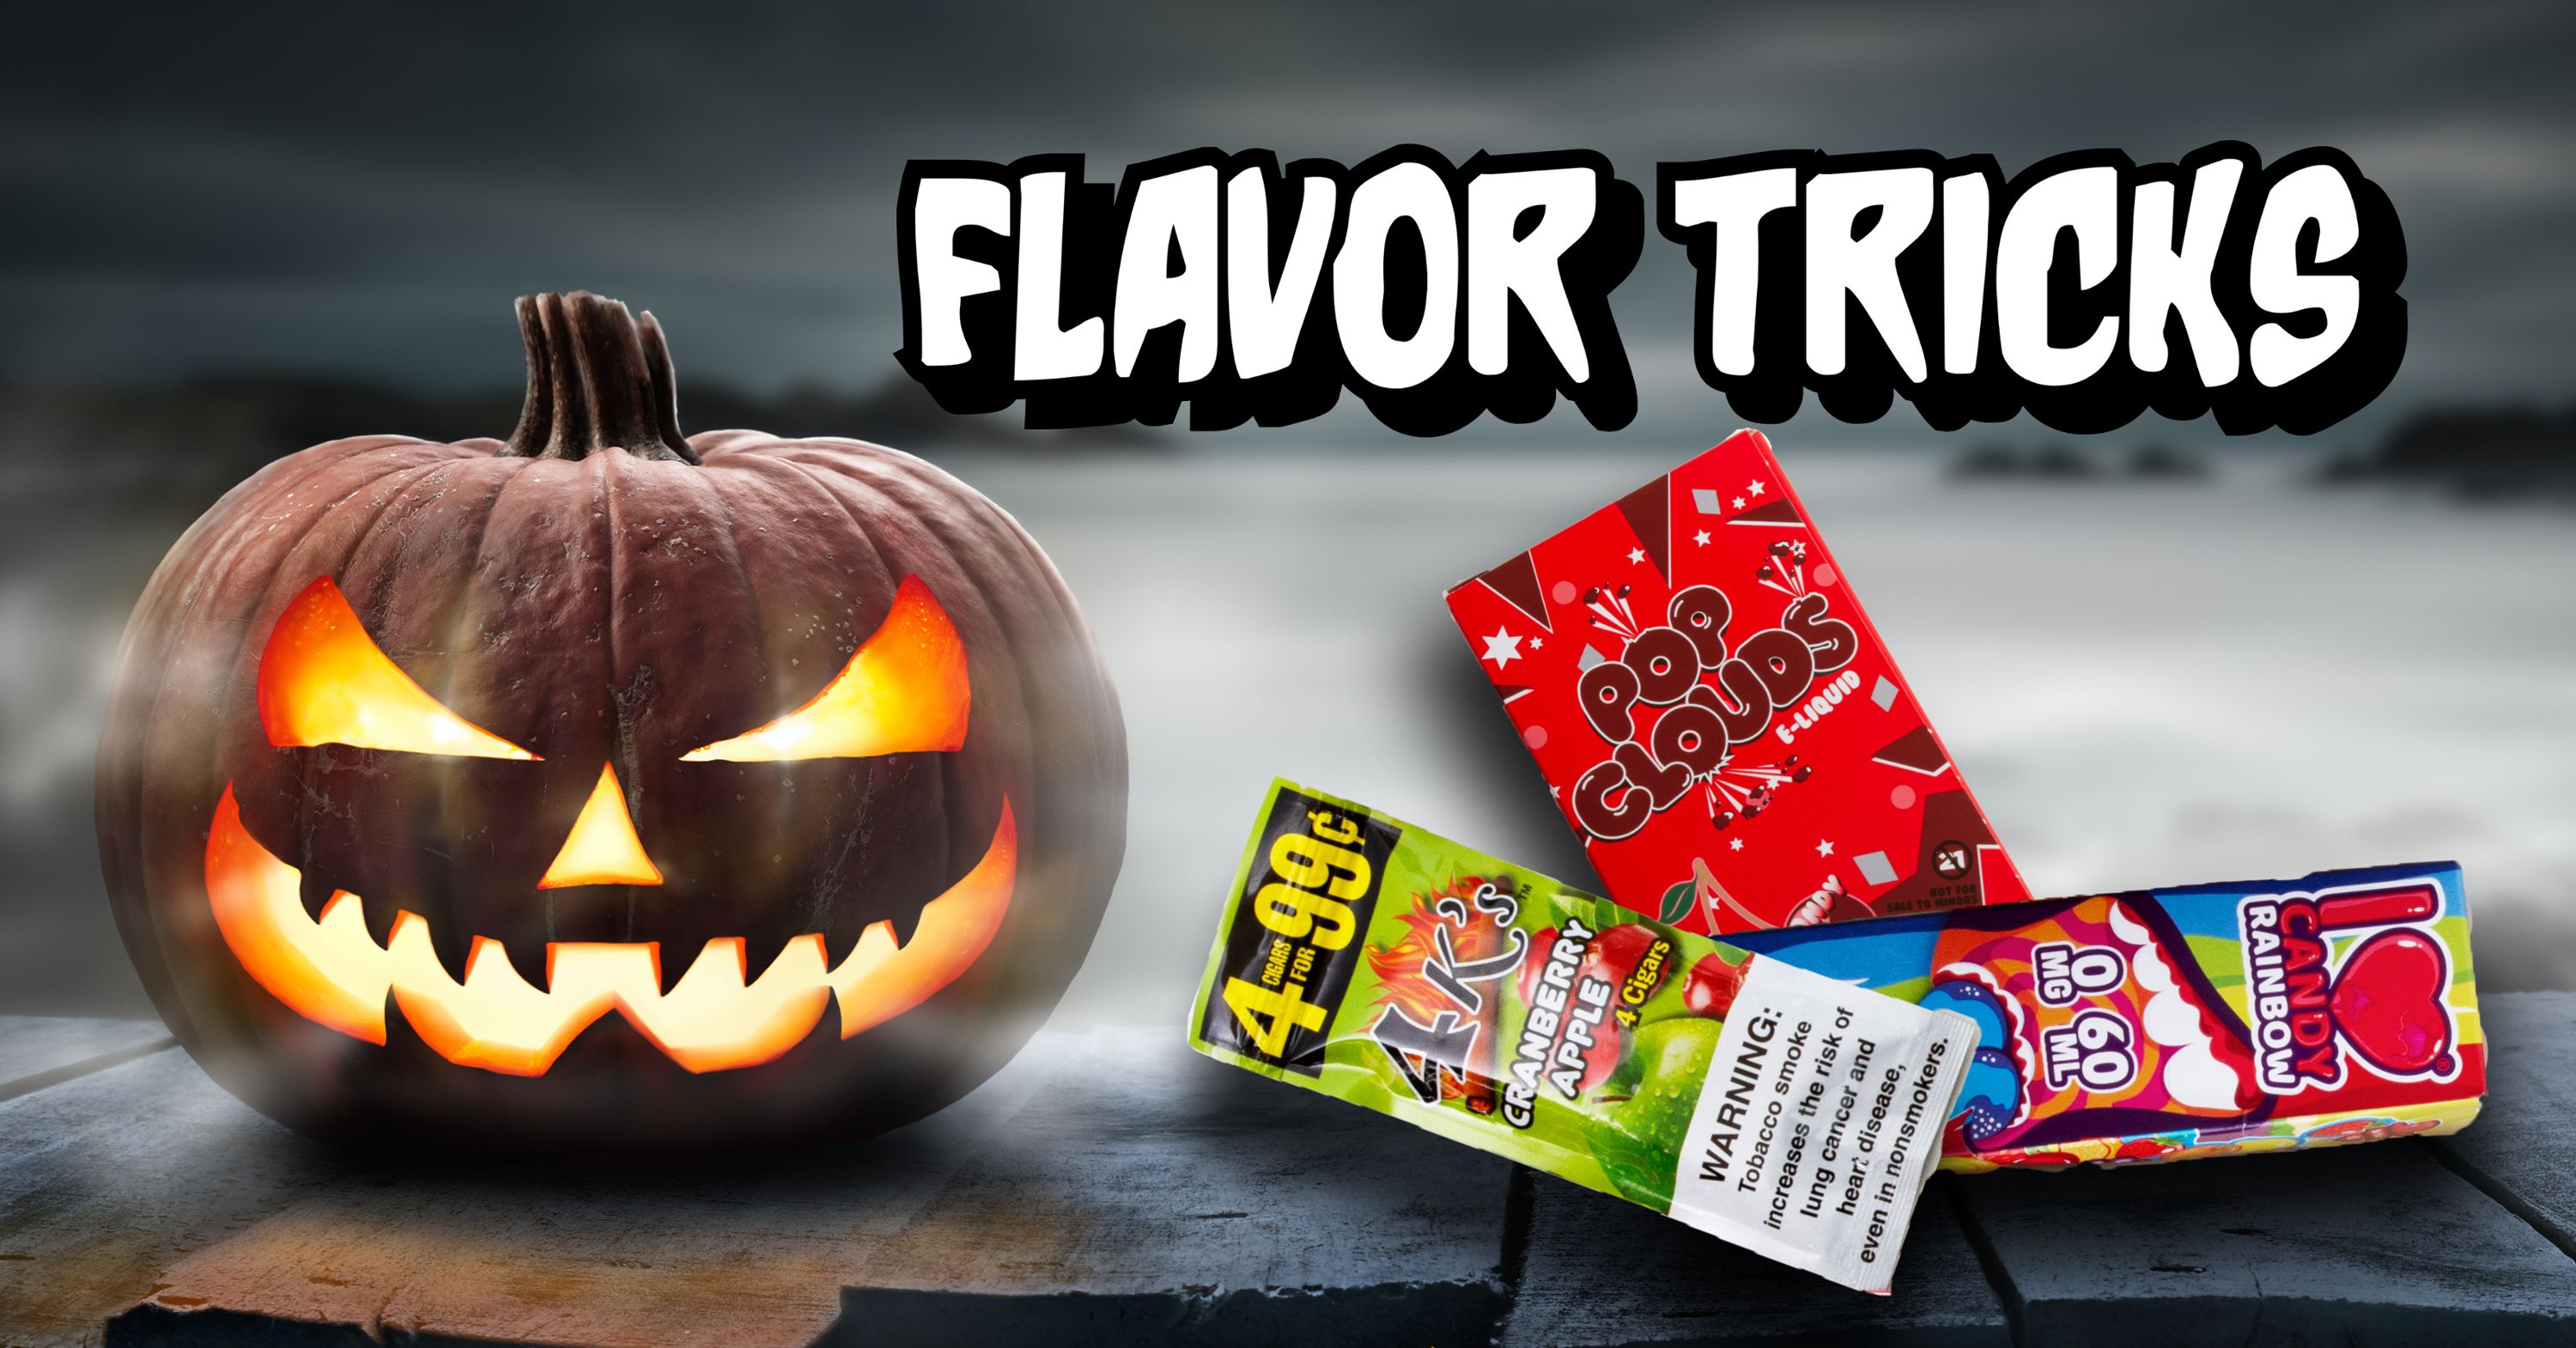 Flavor Tricks (includes a jack-o-lantern and flavored tobacco products)